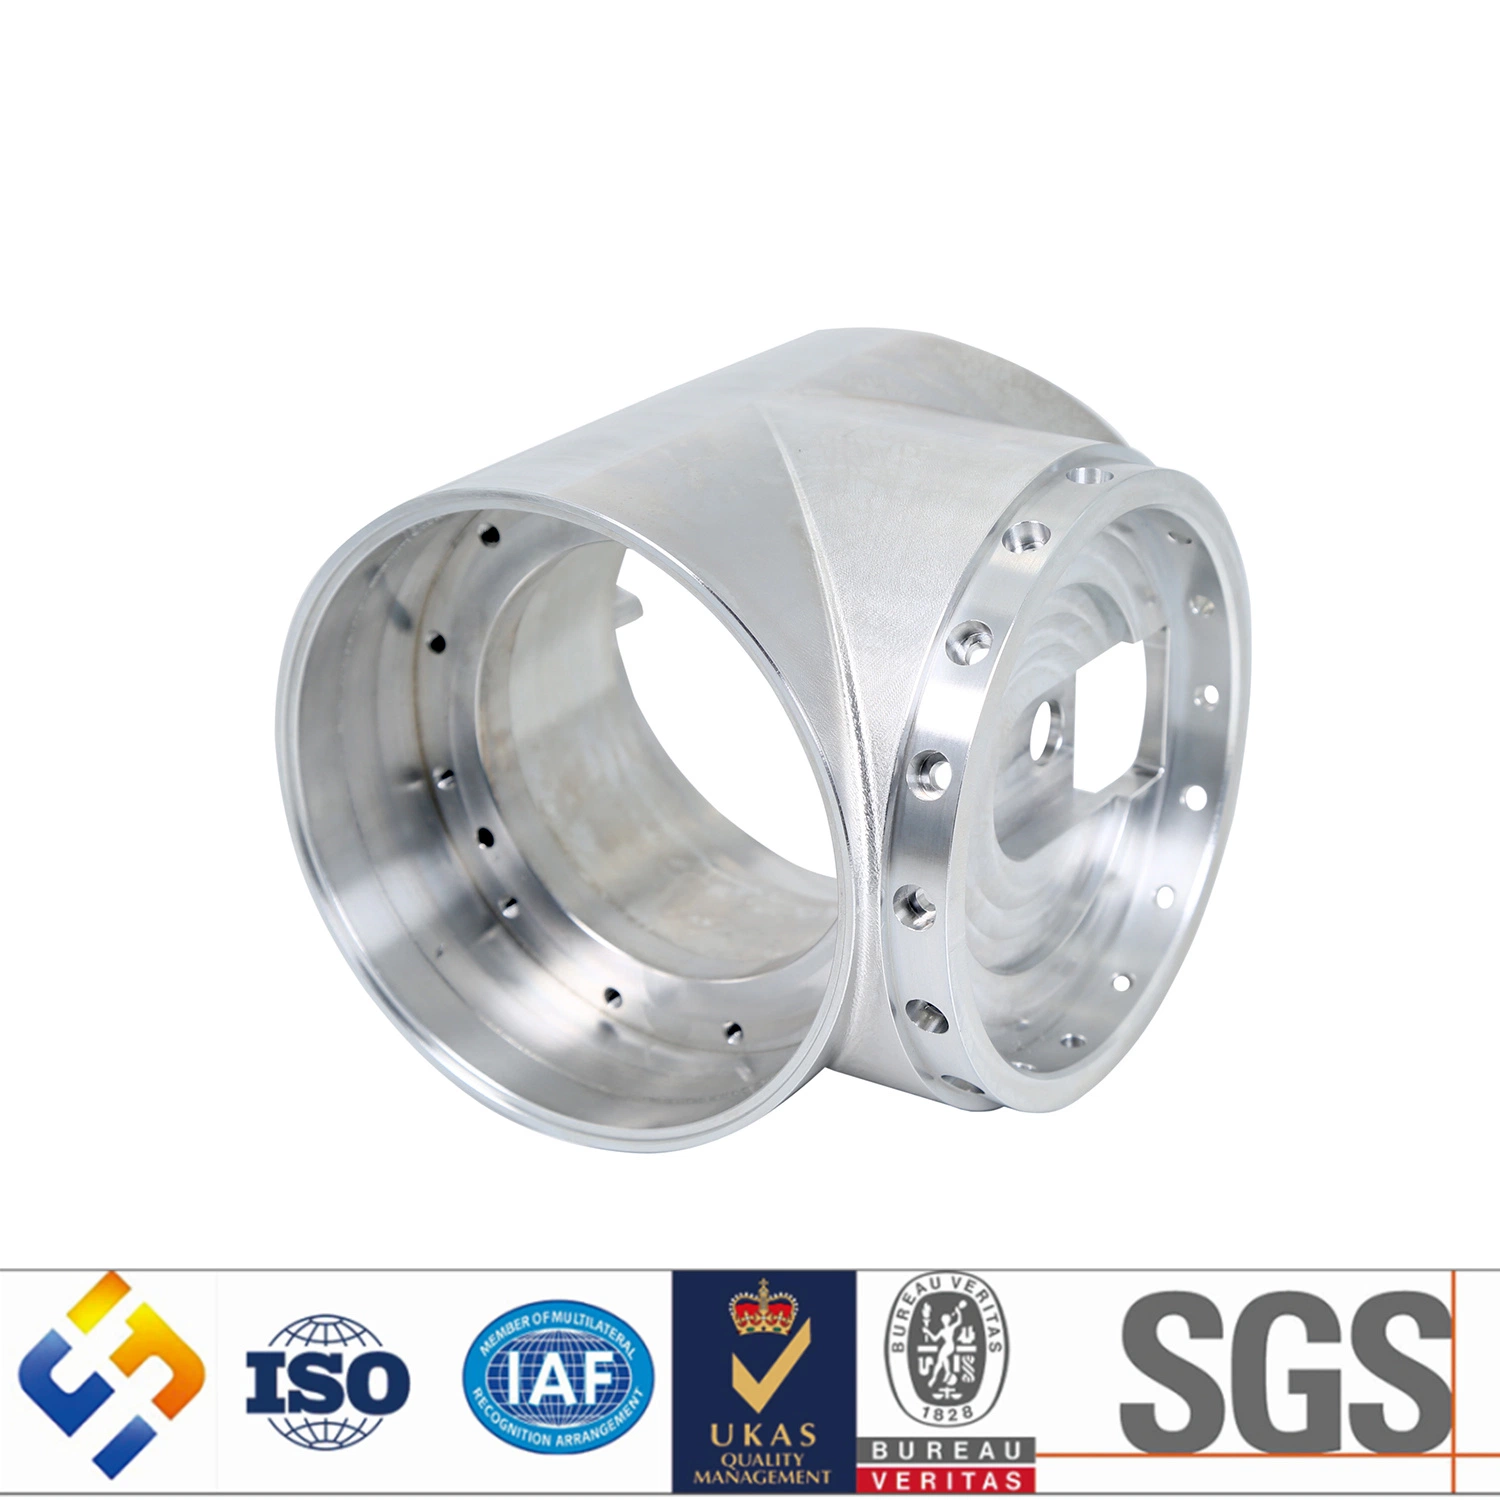 CNC Machining Aluminium Parts Used in Mechanical Medical Electronics Industry